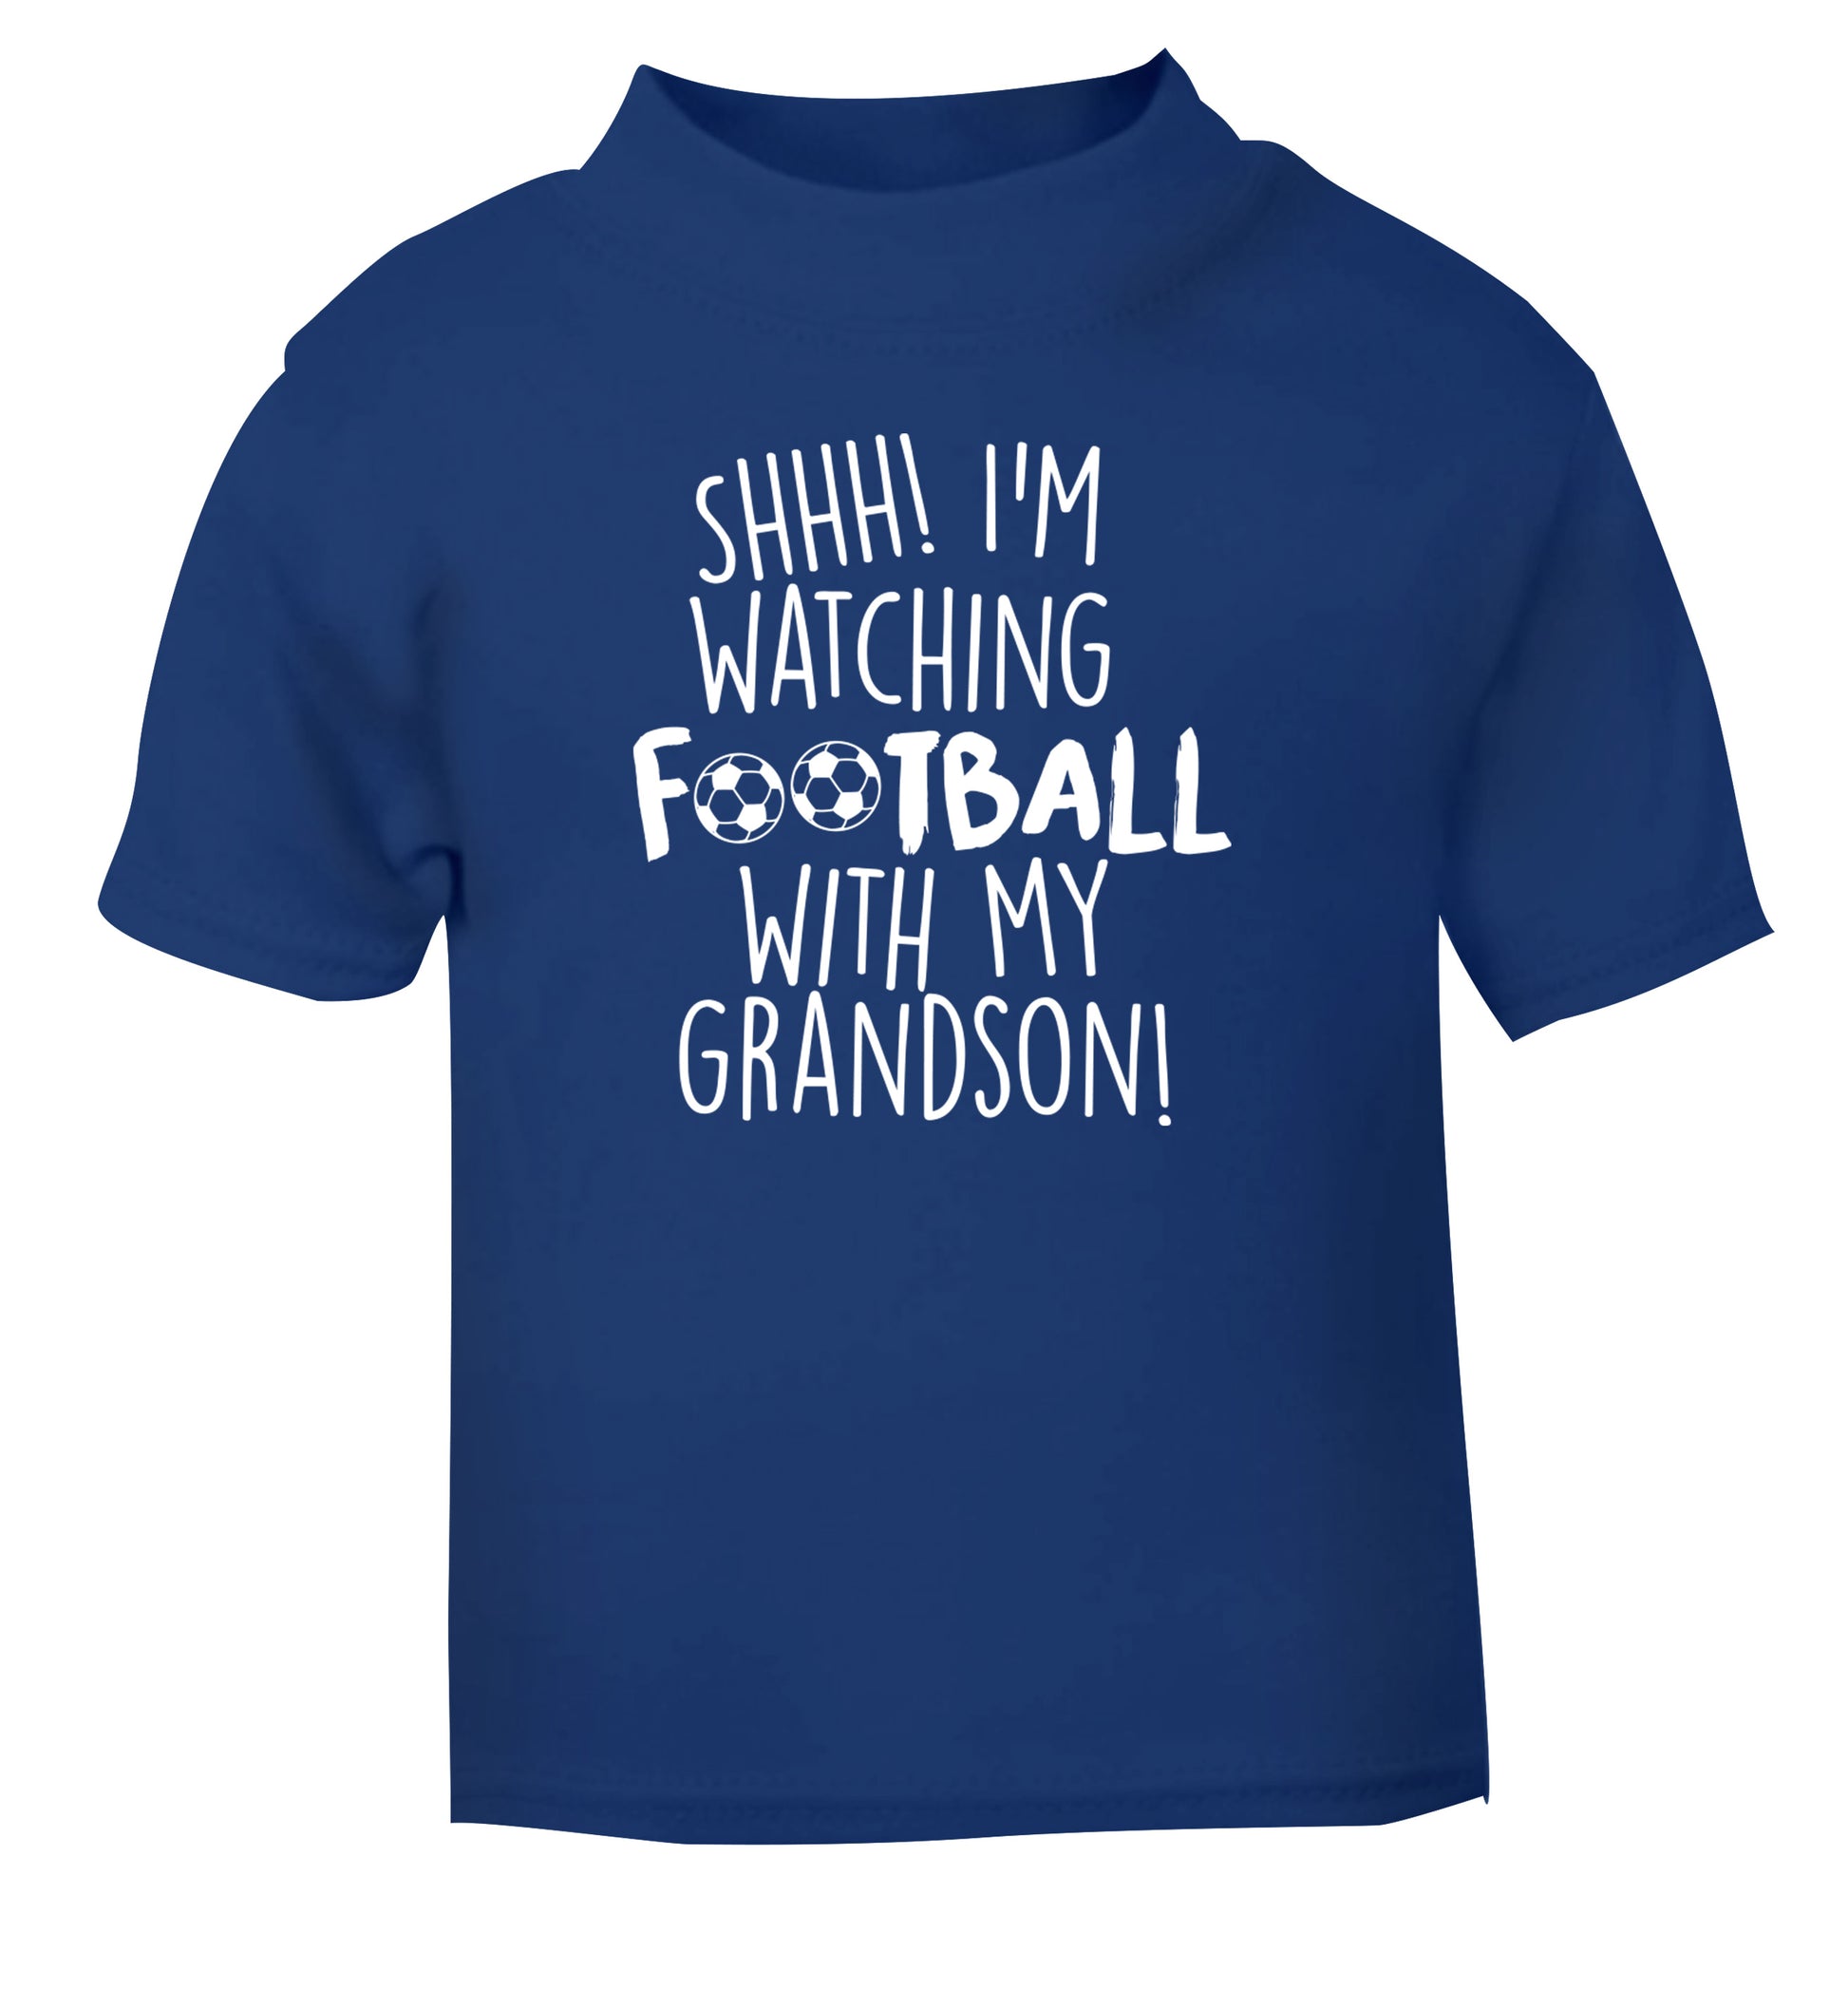 Shhh I'm watching football with my grandson blue Baby Toddler Tshirt 2 Years